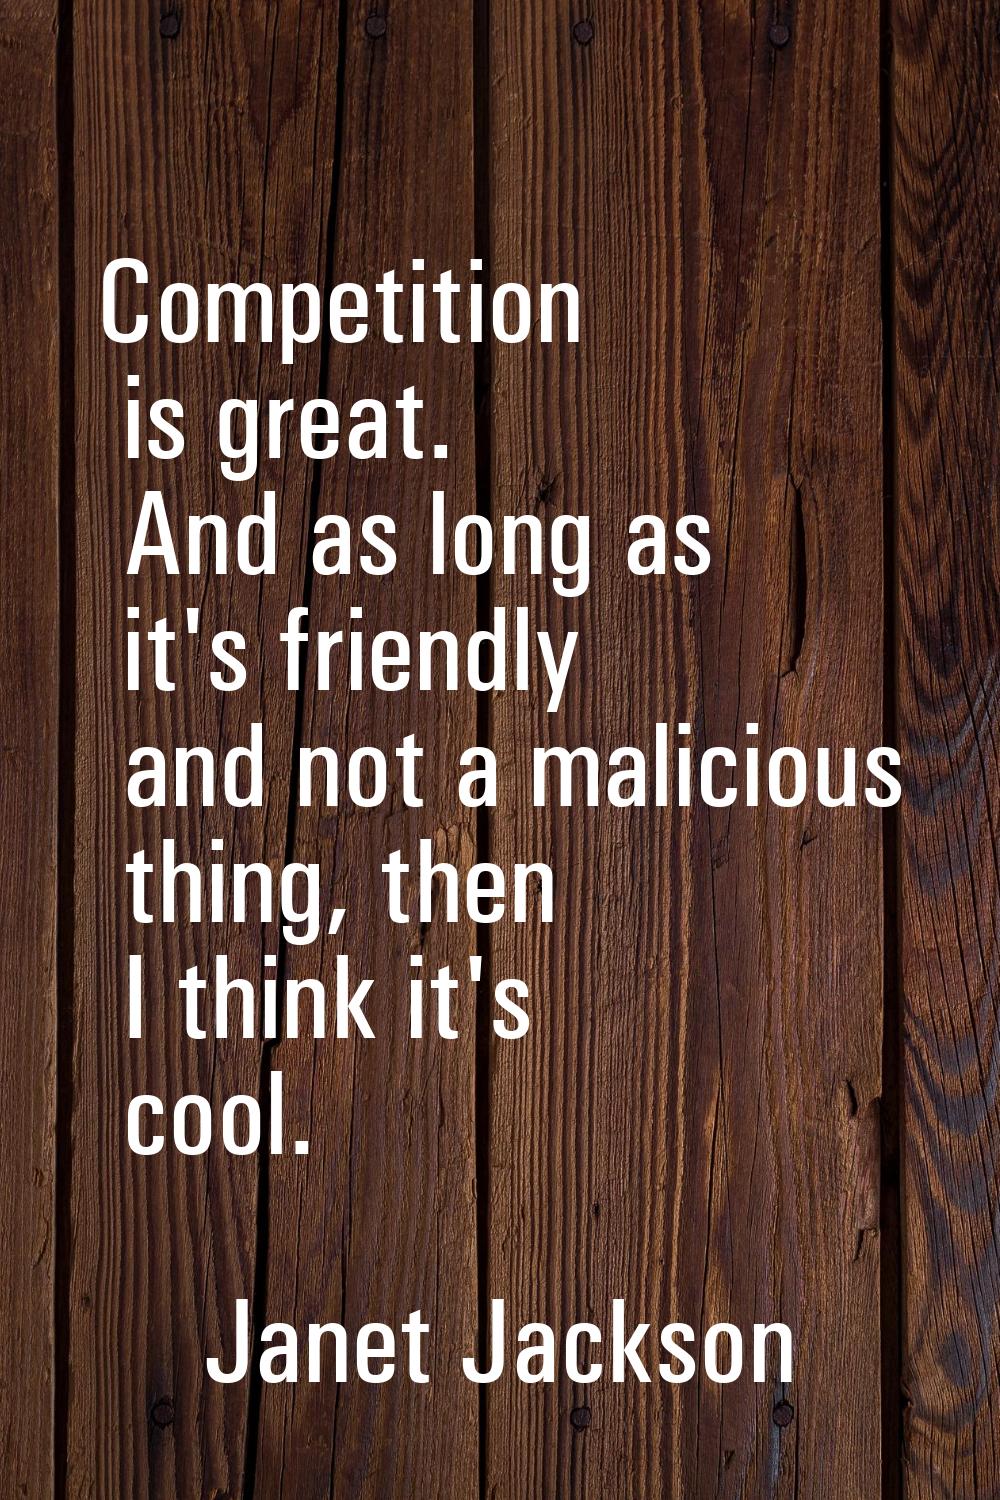 Competition is great. And as long as it's friendly and not a malicious thing, then I think it's coo